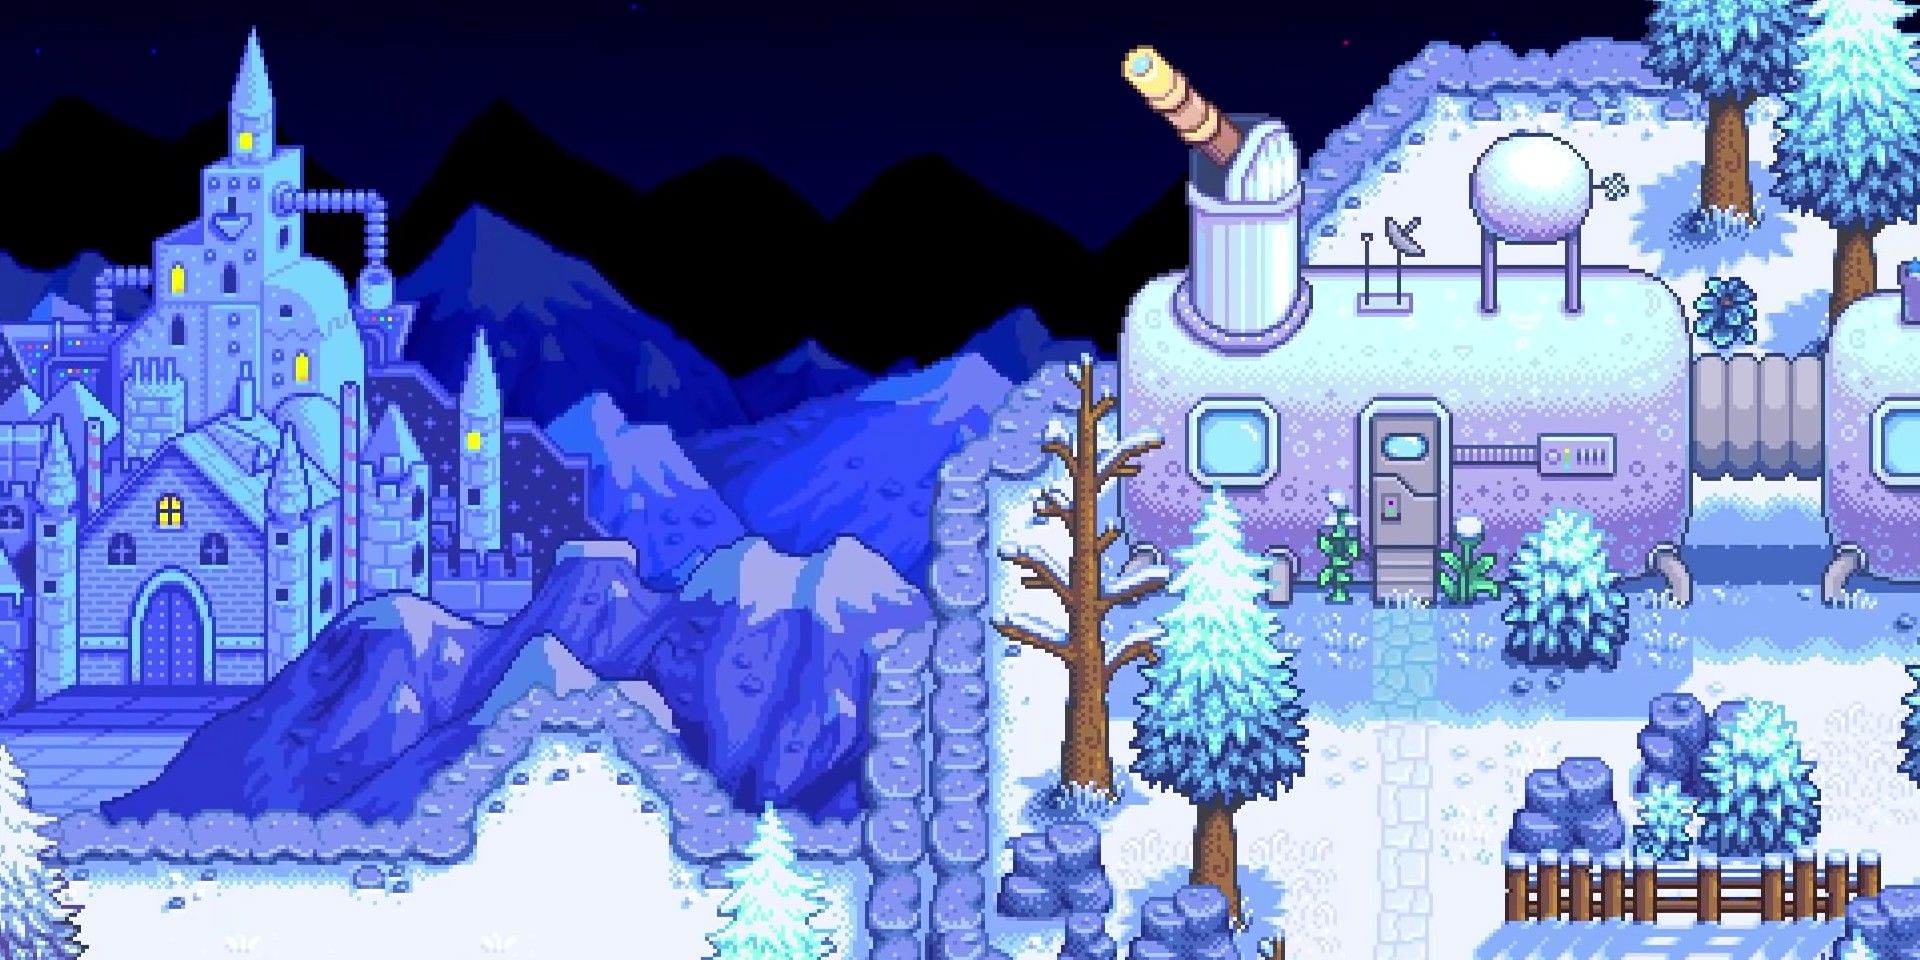 An observatory and a castle from Haunted Chocolatier in a mountainous, snowy region.